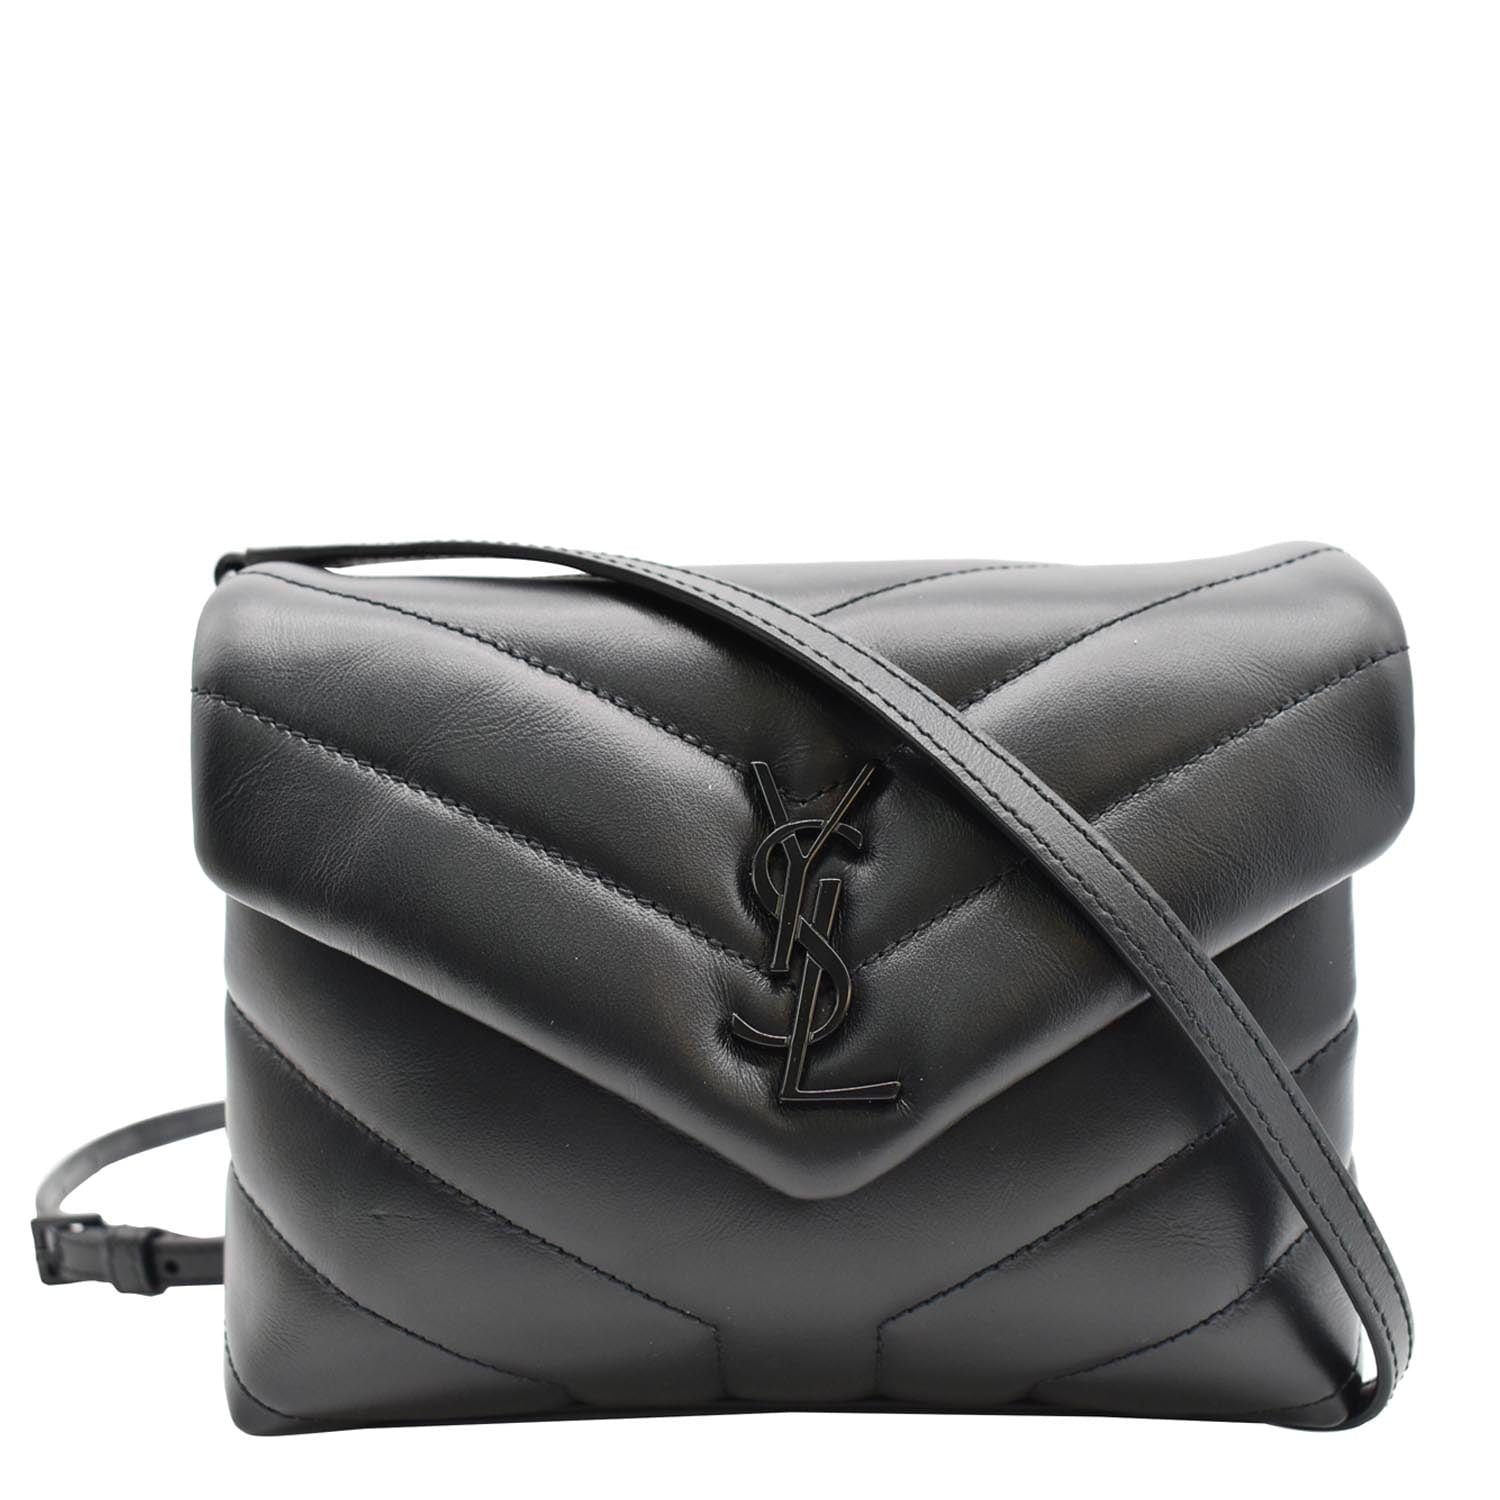 Loulou leather crossbody bag Saint Laurent Black in Leather - 28896753